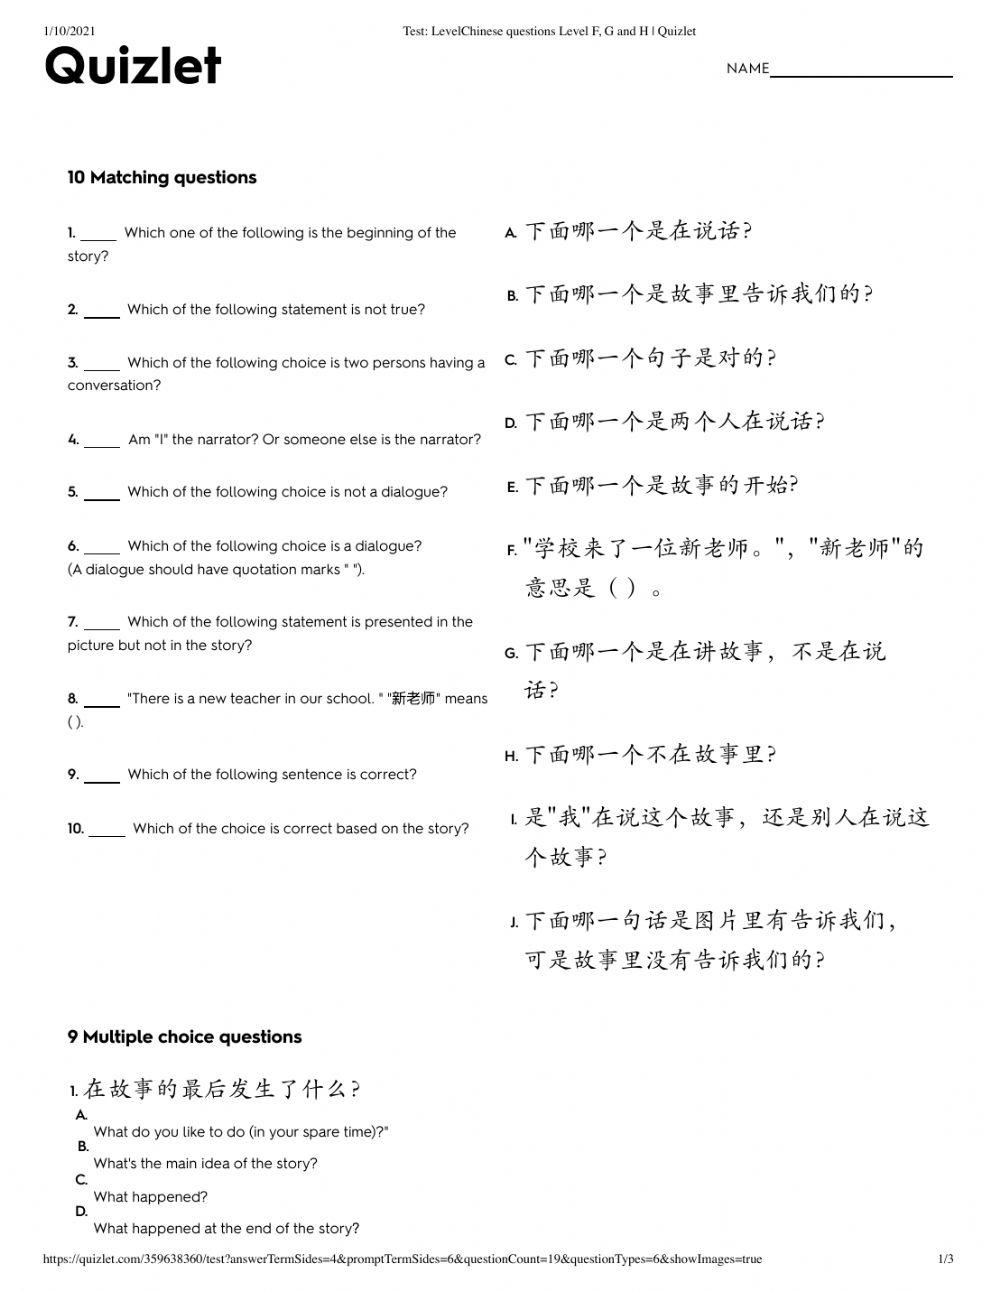 LevelChinese questions Level F, G and H